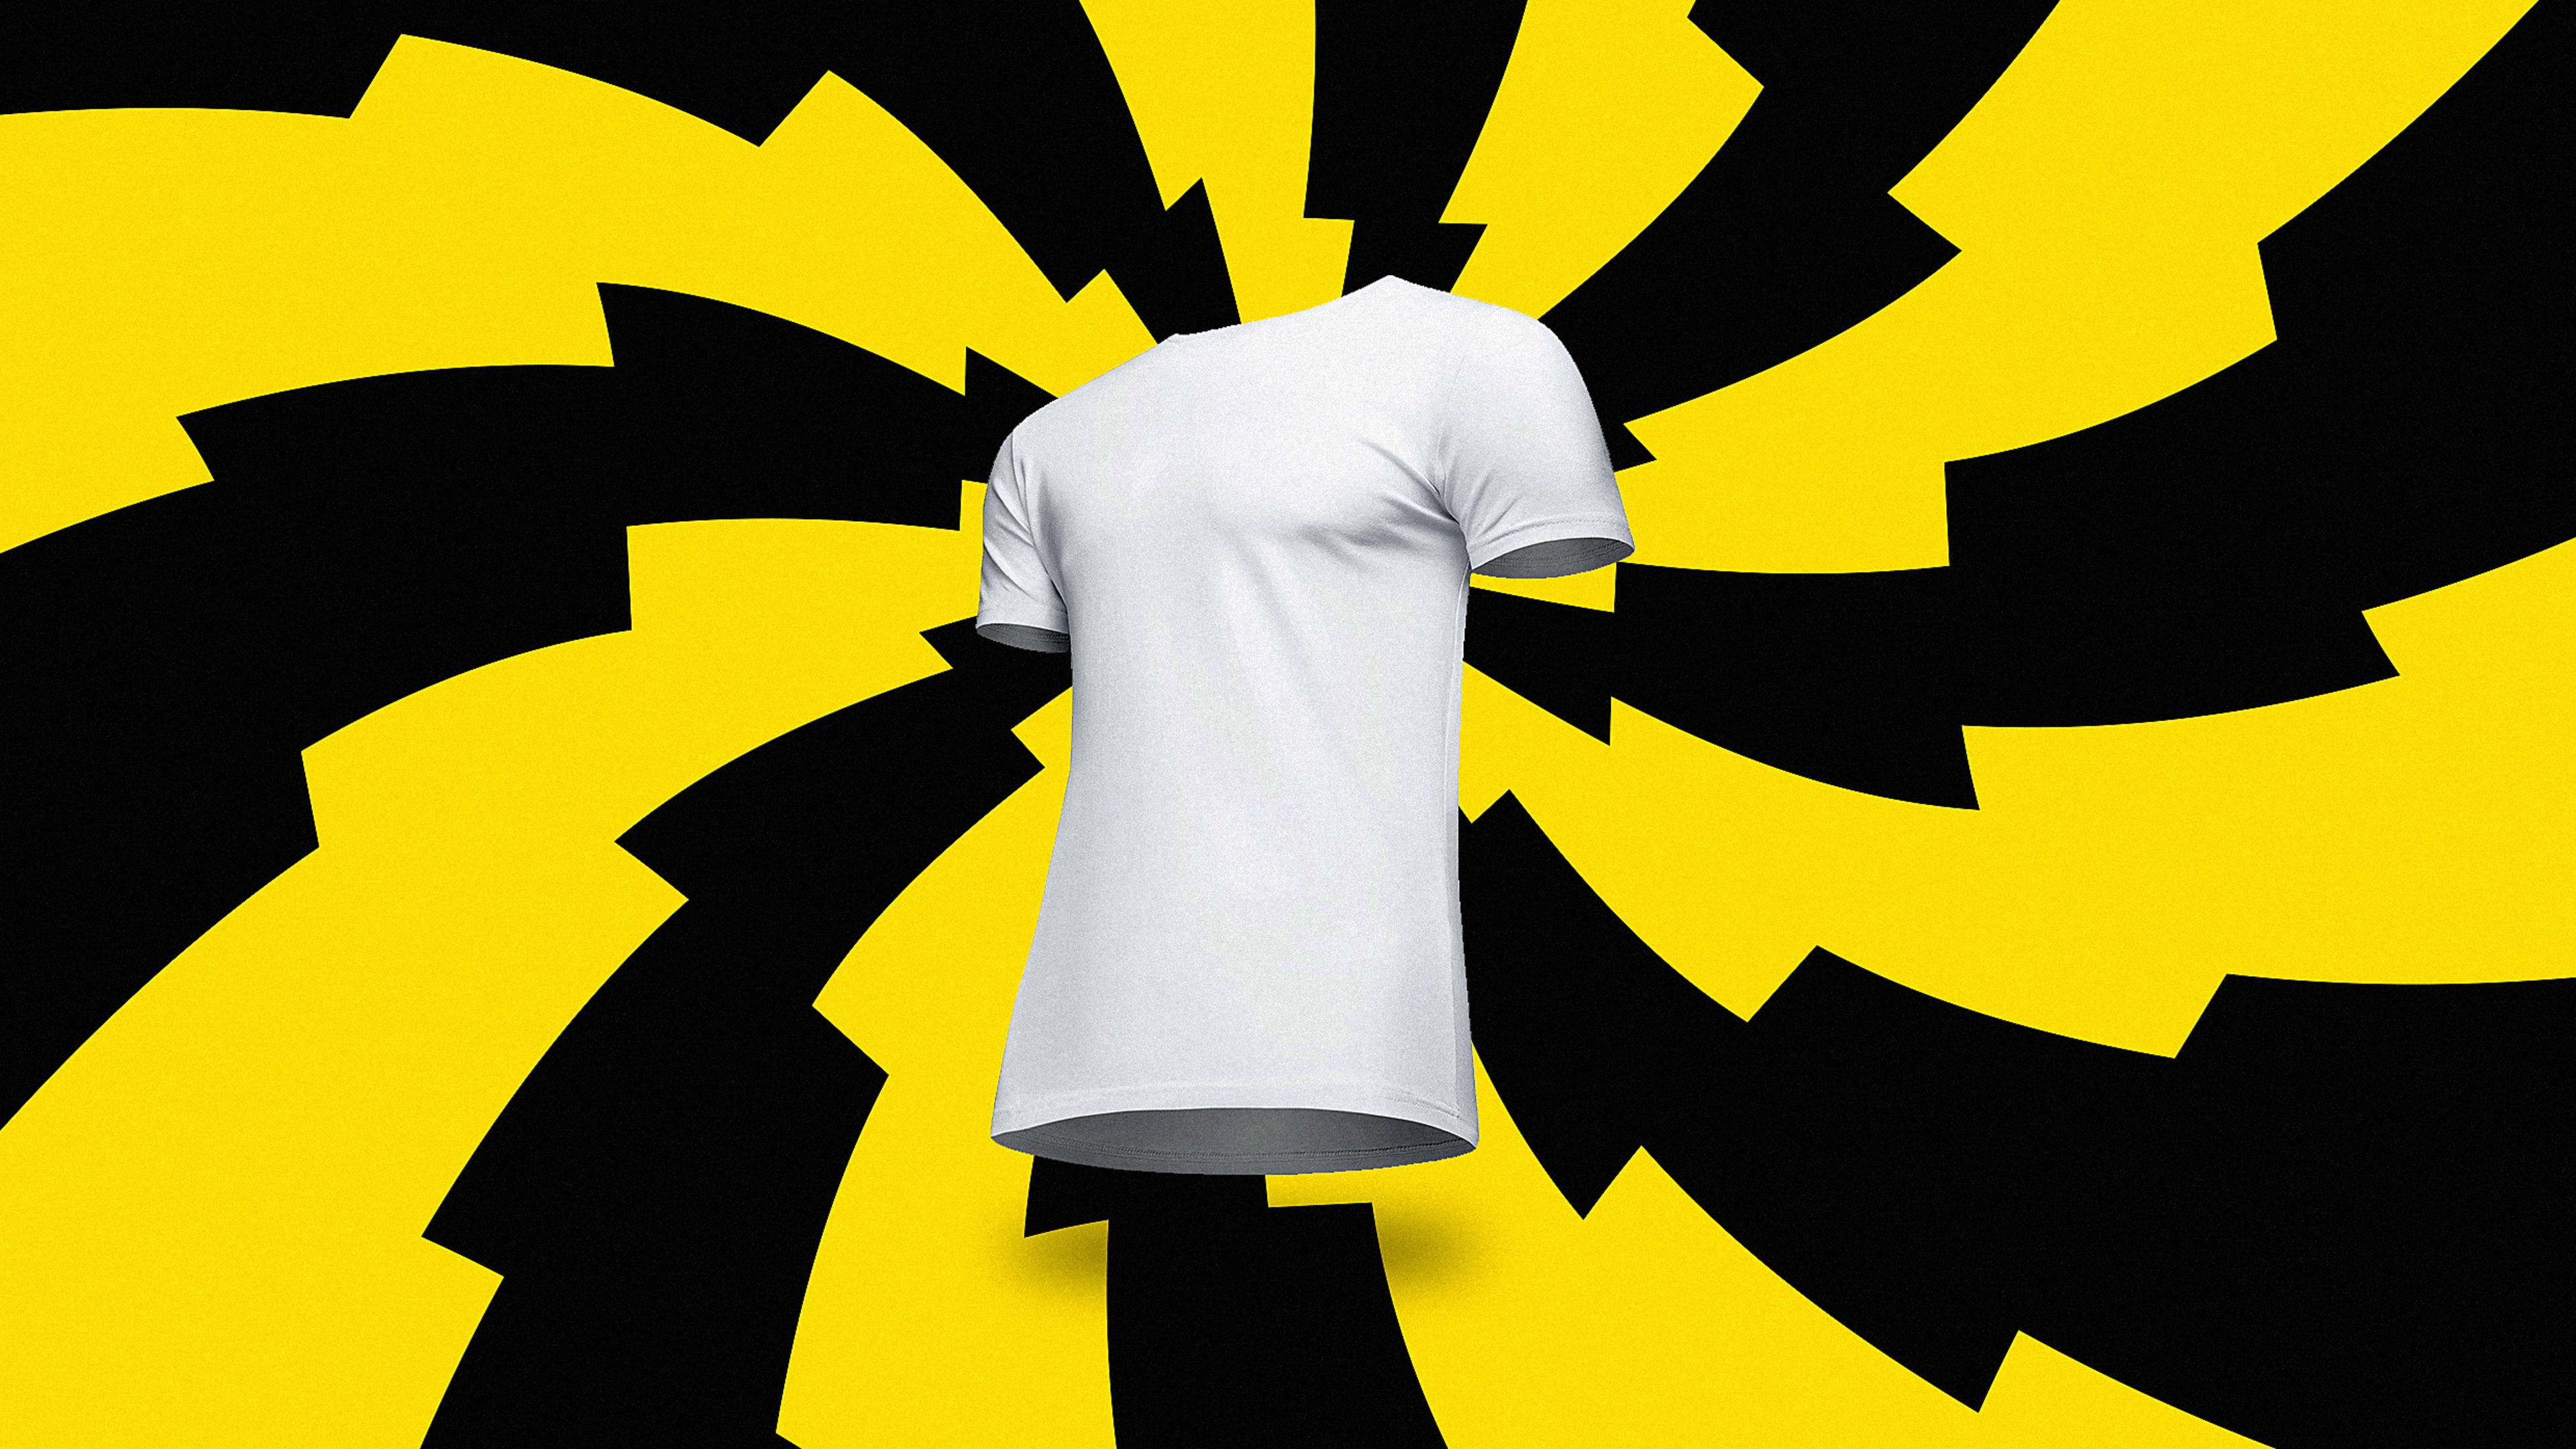 This T-shirt uses your body heat to generate electricity